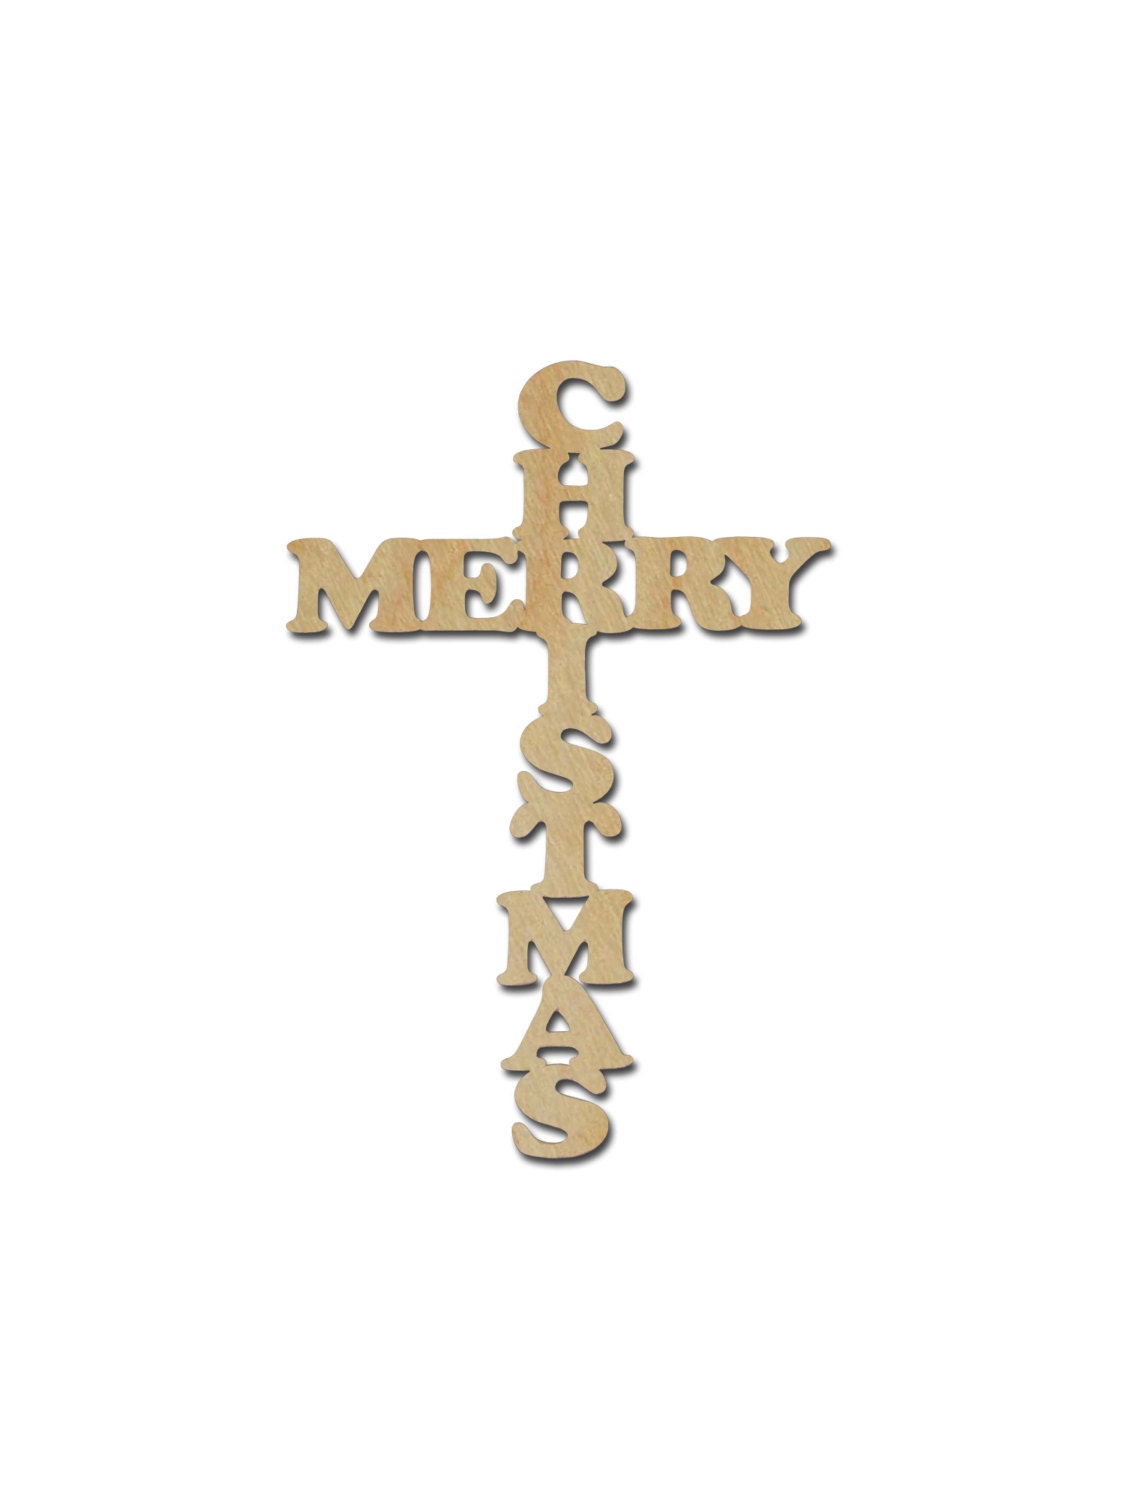 Merry Christmas Cross Unfinished Wooden Cut Out 7 x